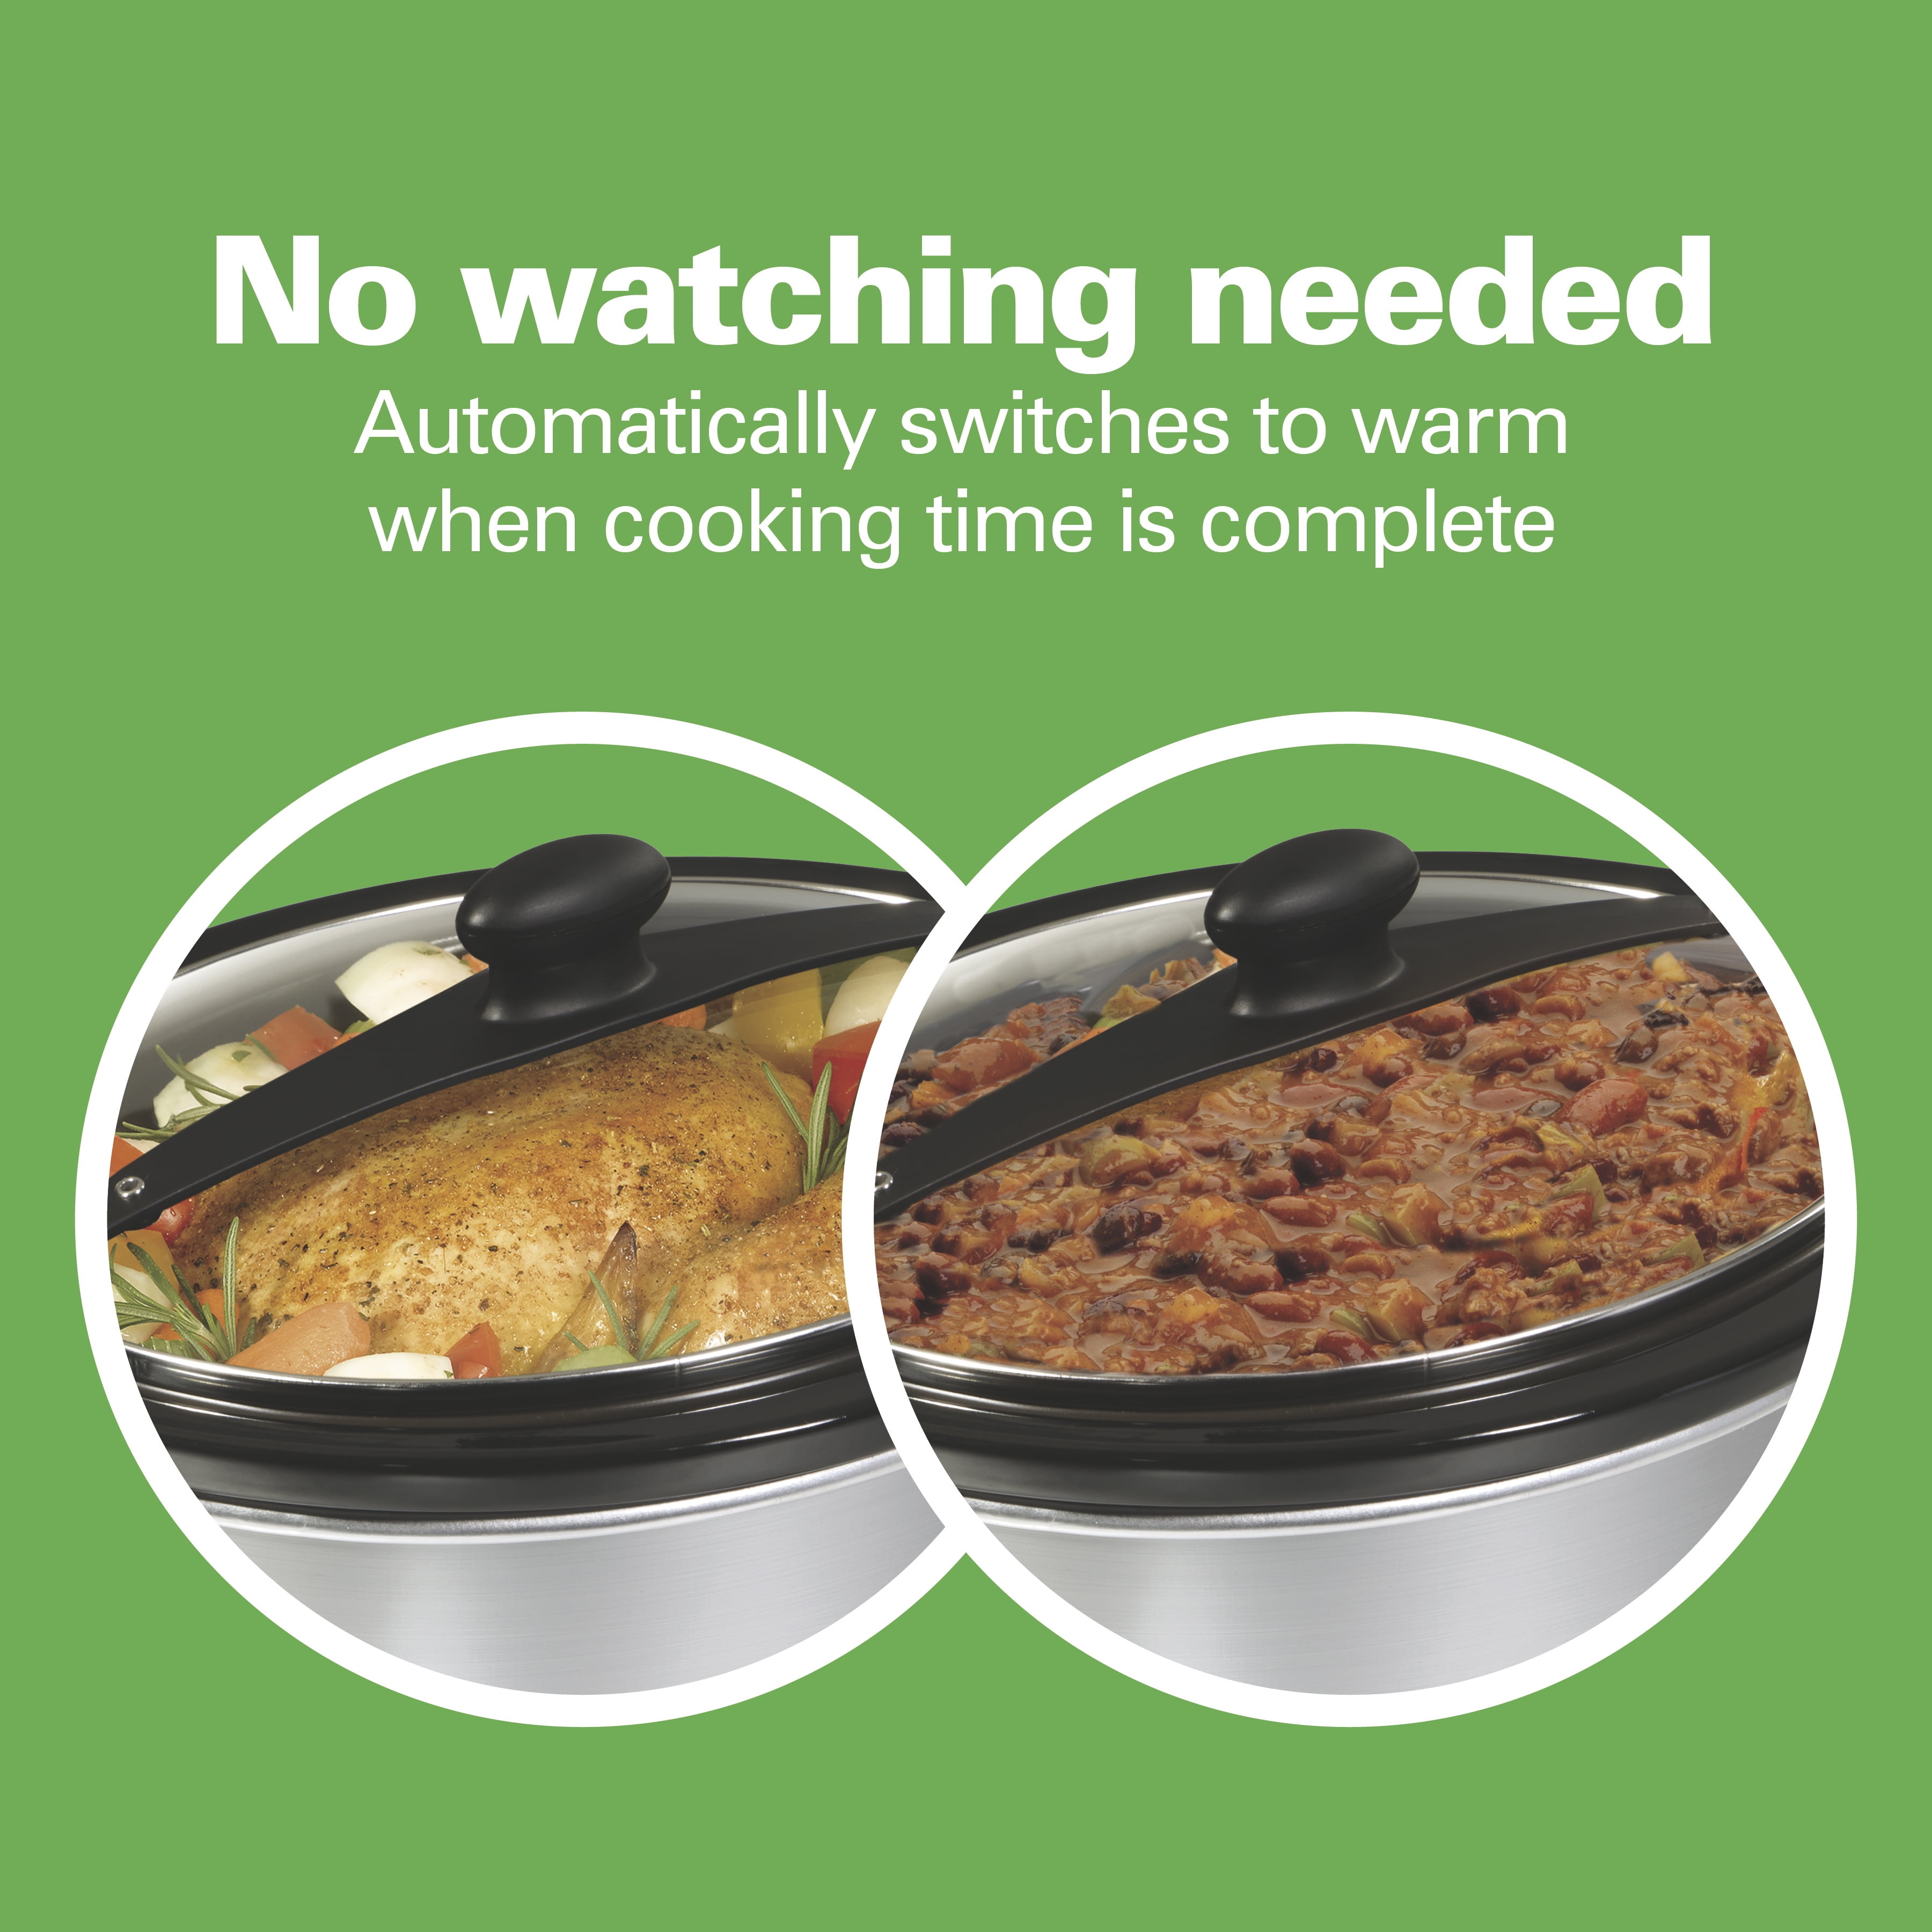 Hamilton Beach Stay or Go Portable Slow Cooker with Lid Lock – Home  Accessories